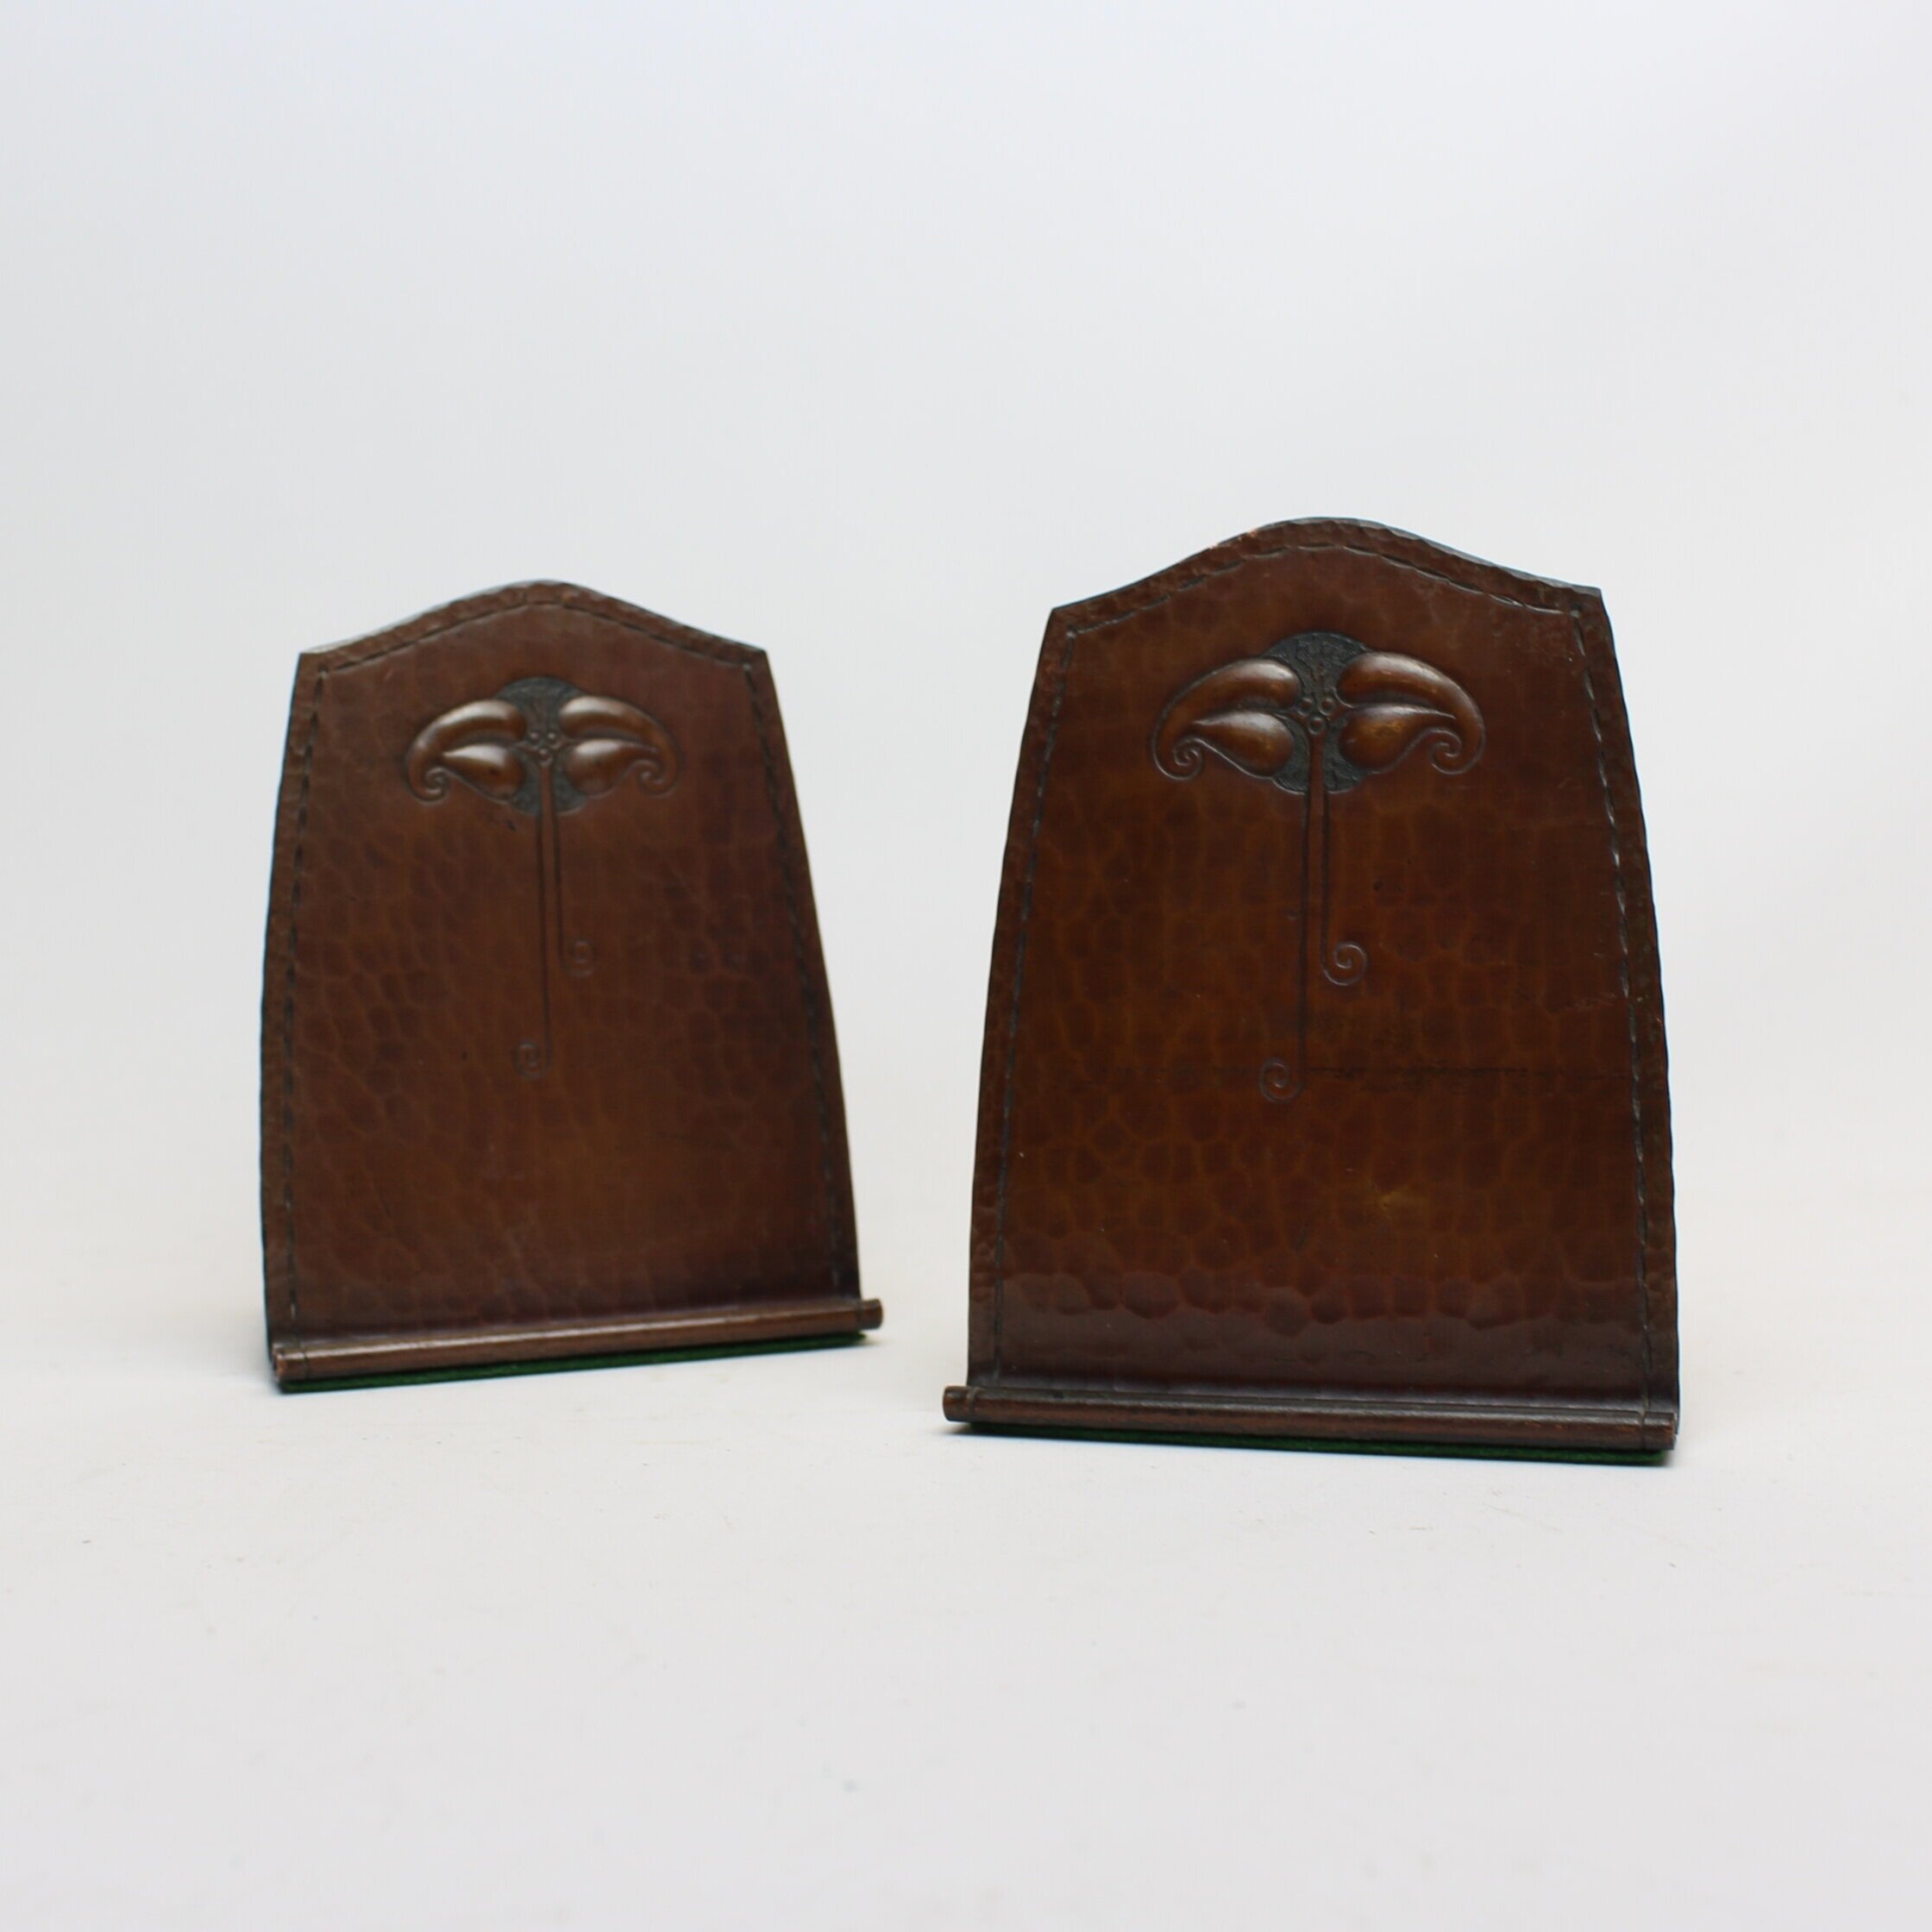 SOLD, Roycroft Double Leaf Bookends